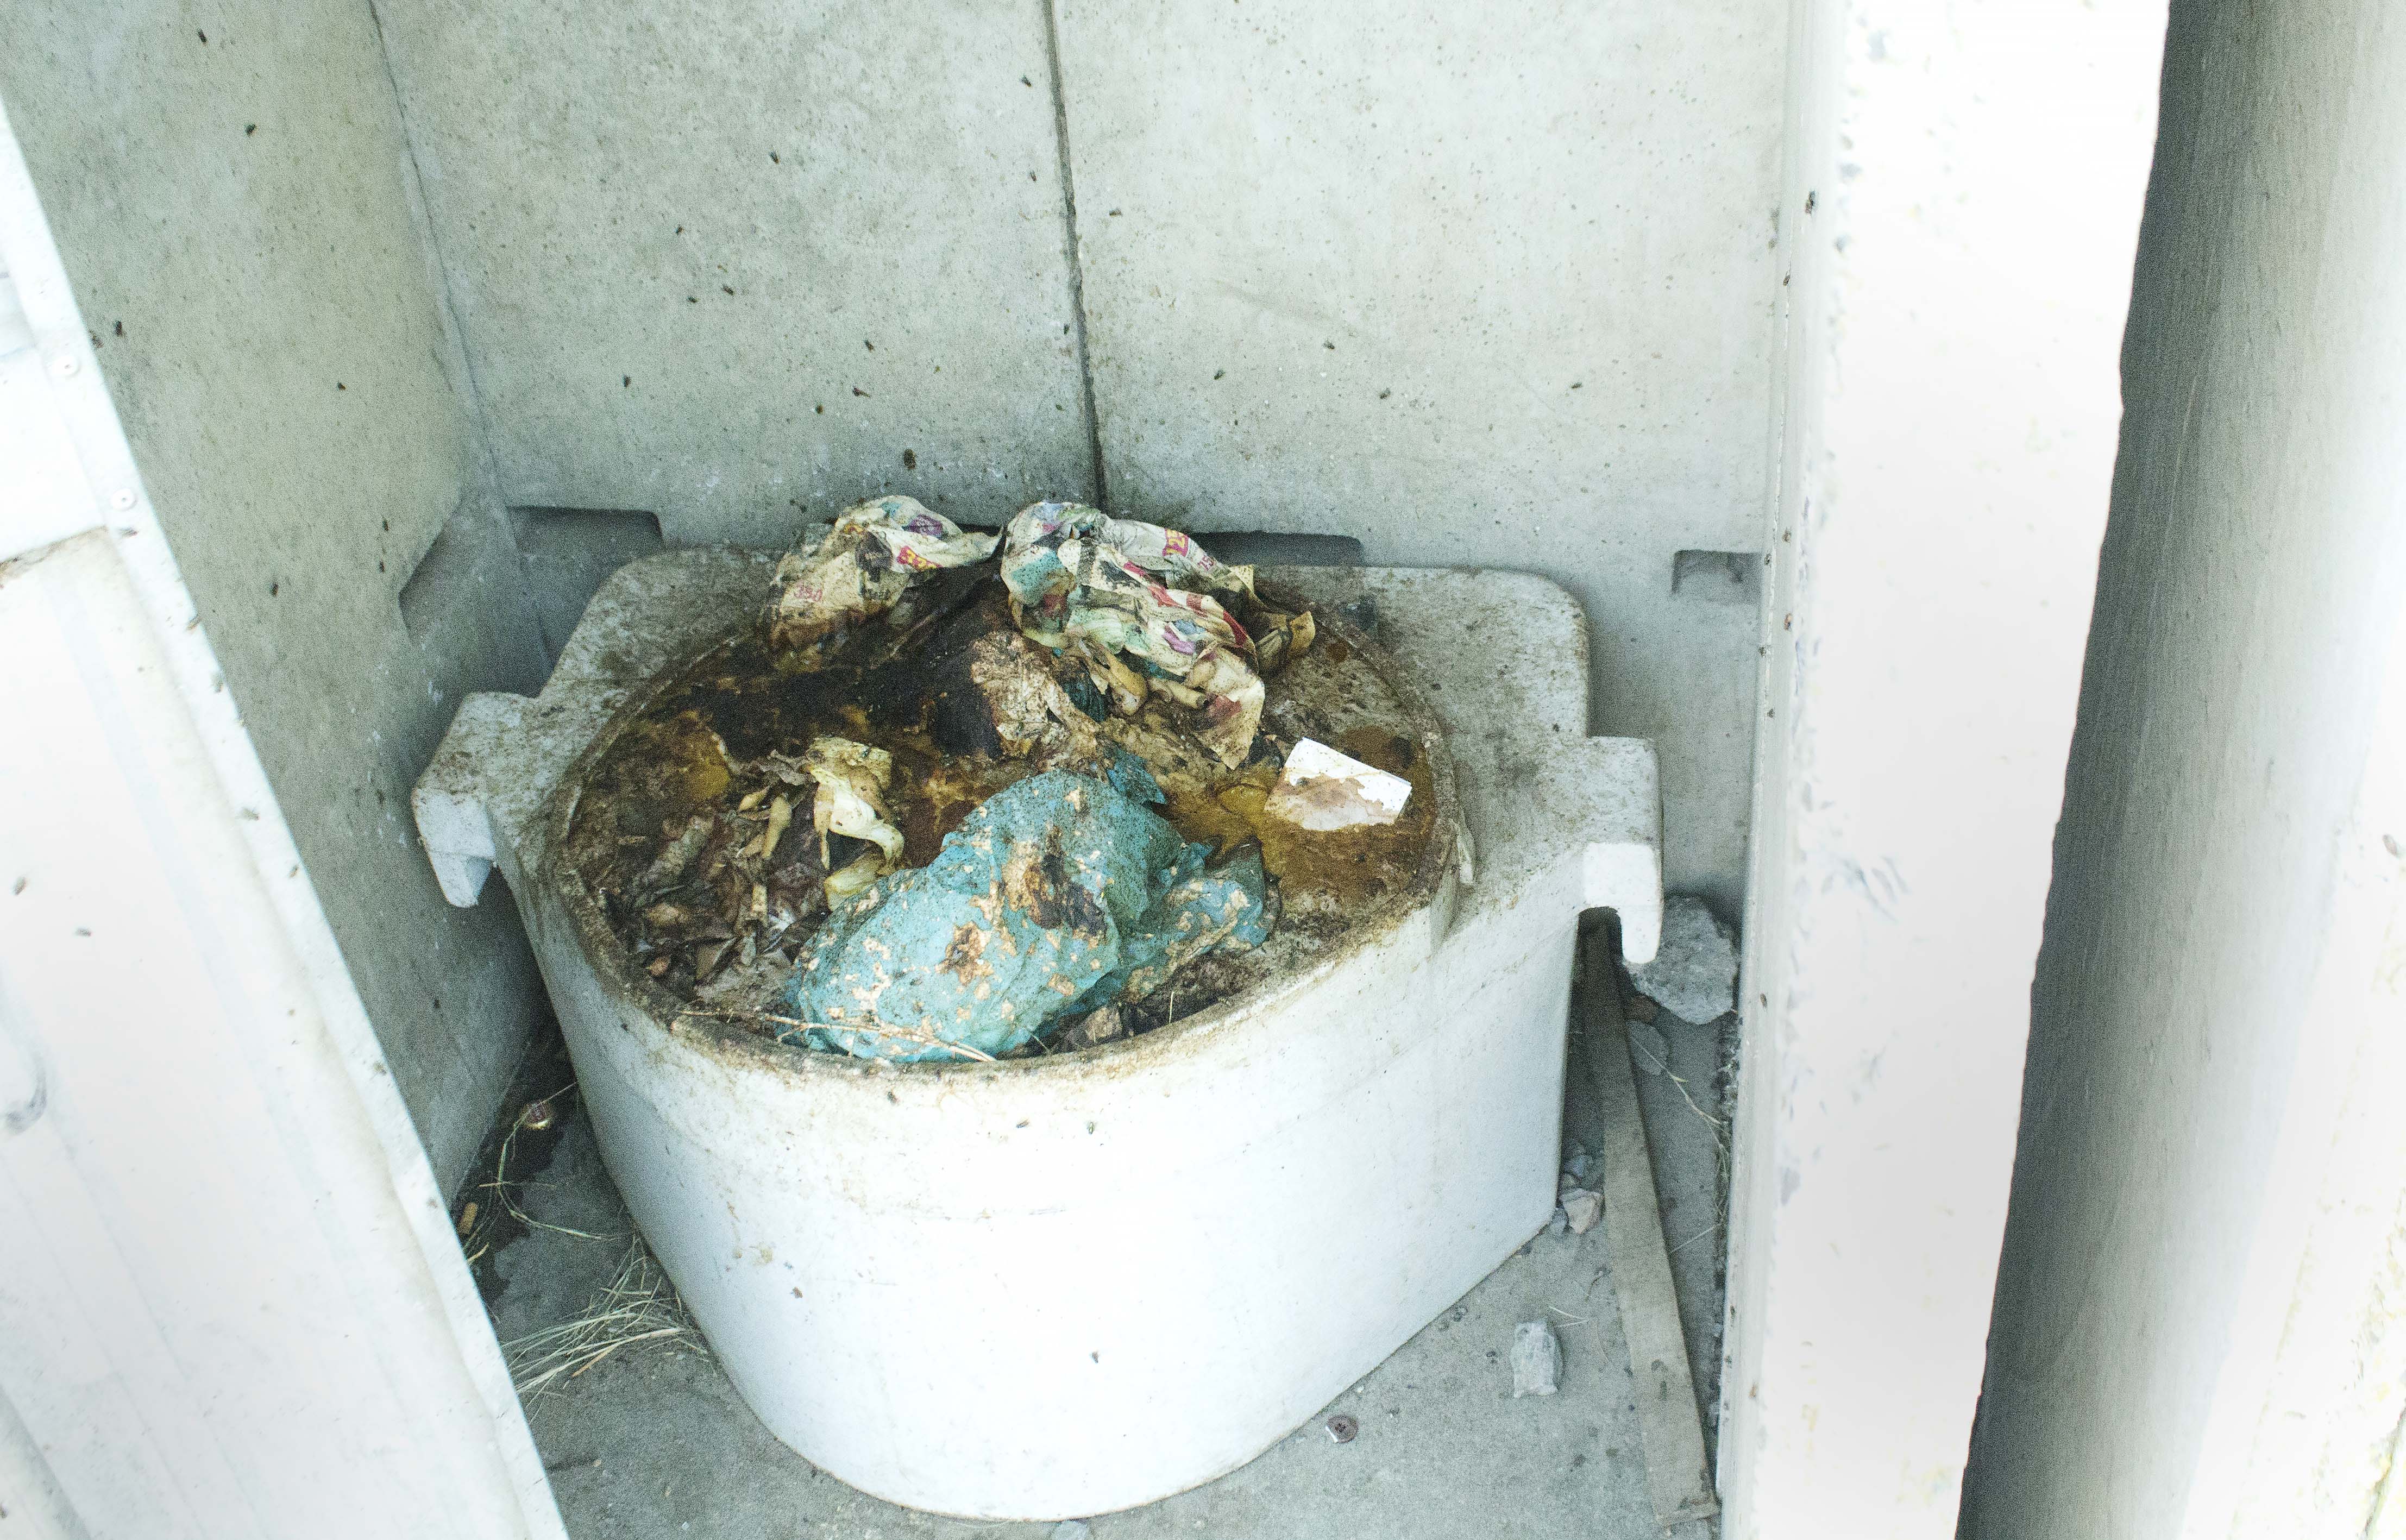 Photo of a filthy communal toilet (far worse than the one in Trainspotting).